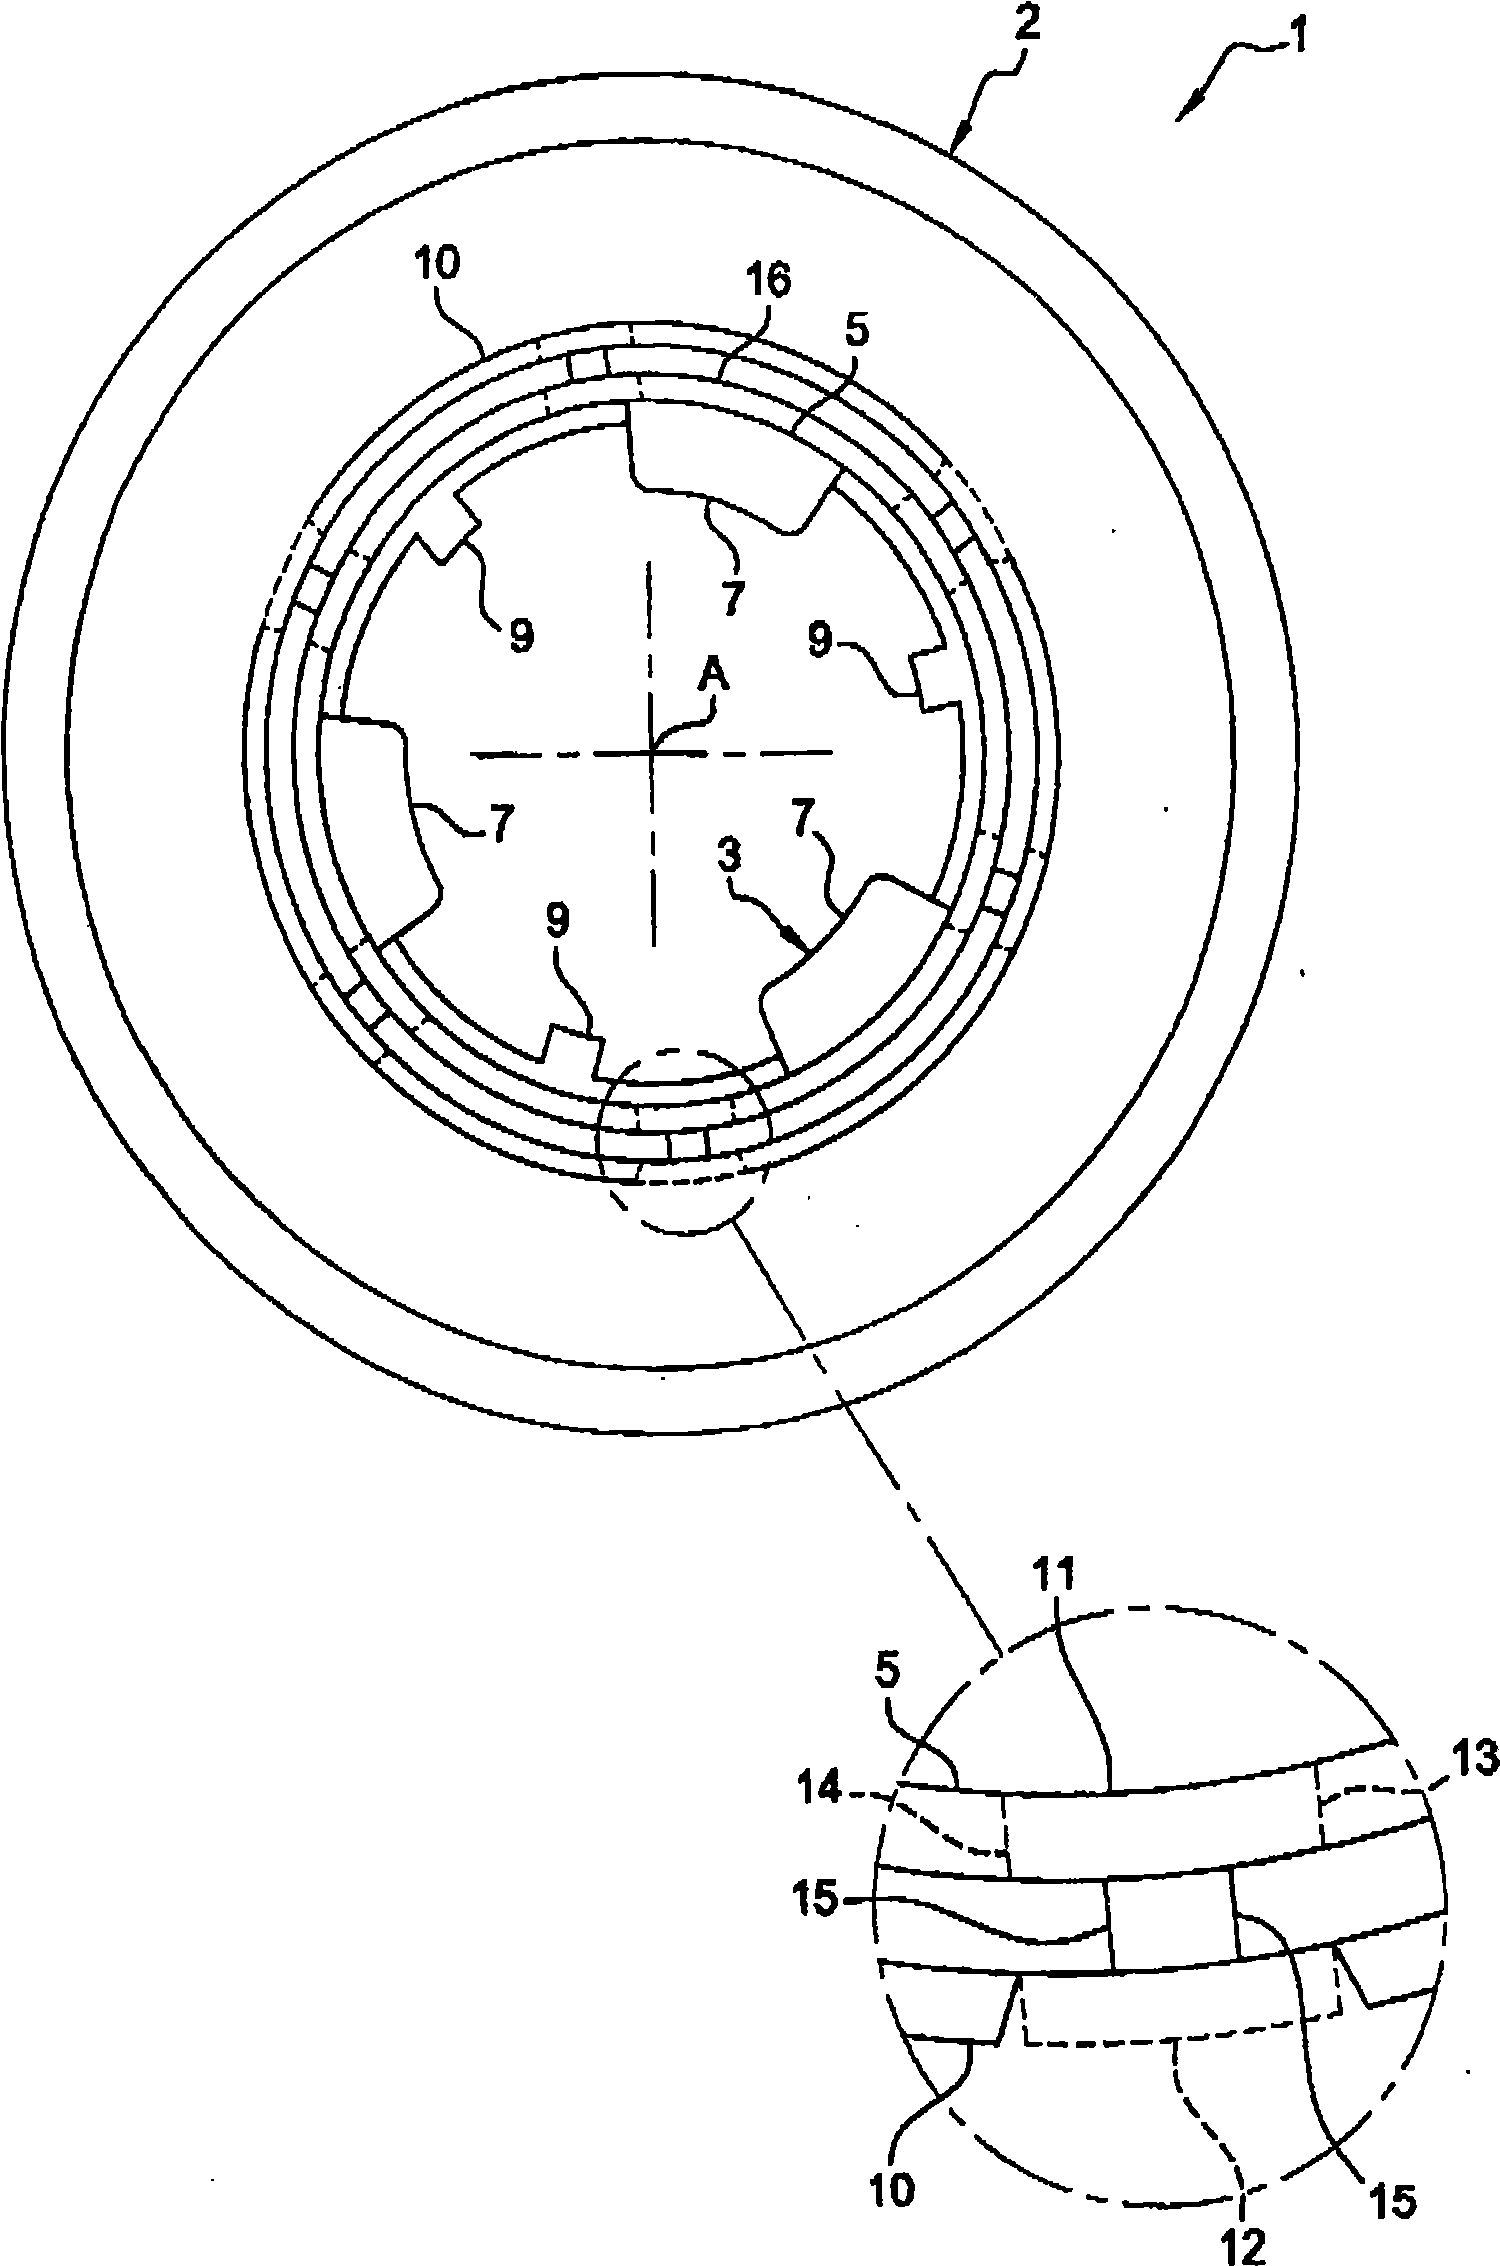 Support device for the motor of a heating and/or air-conditioning ventilation system